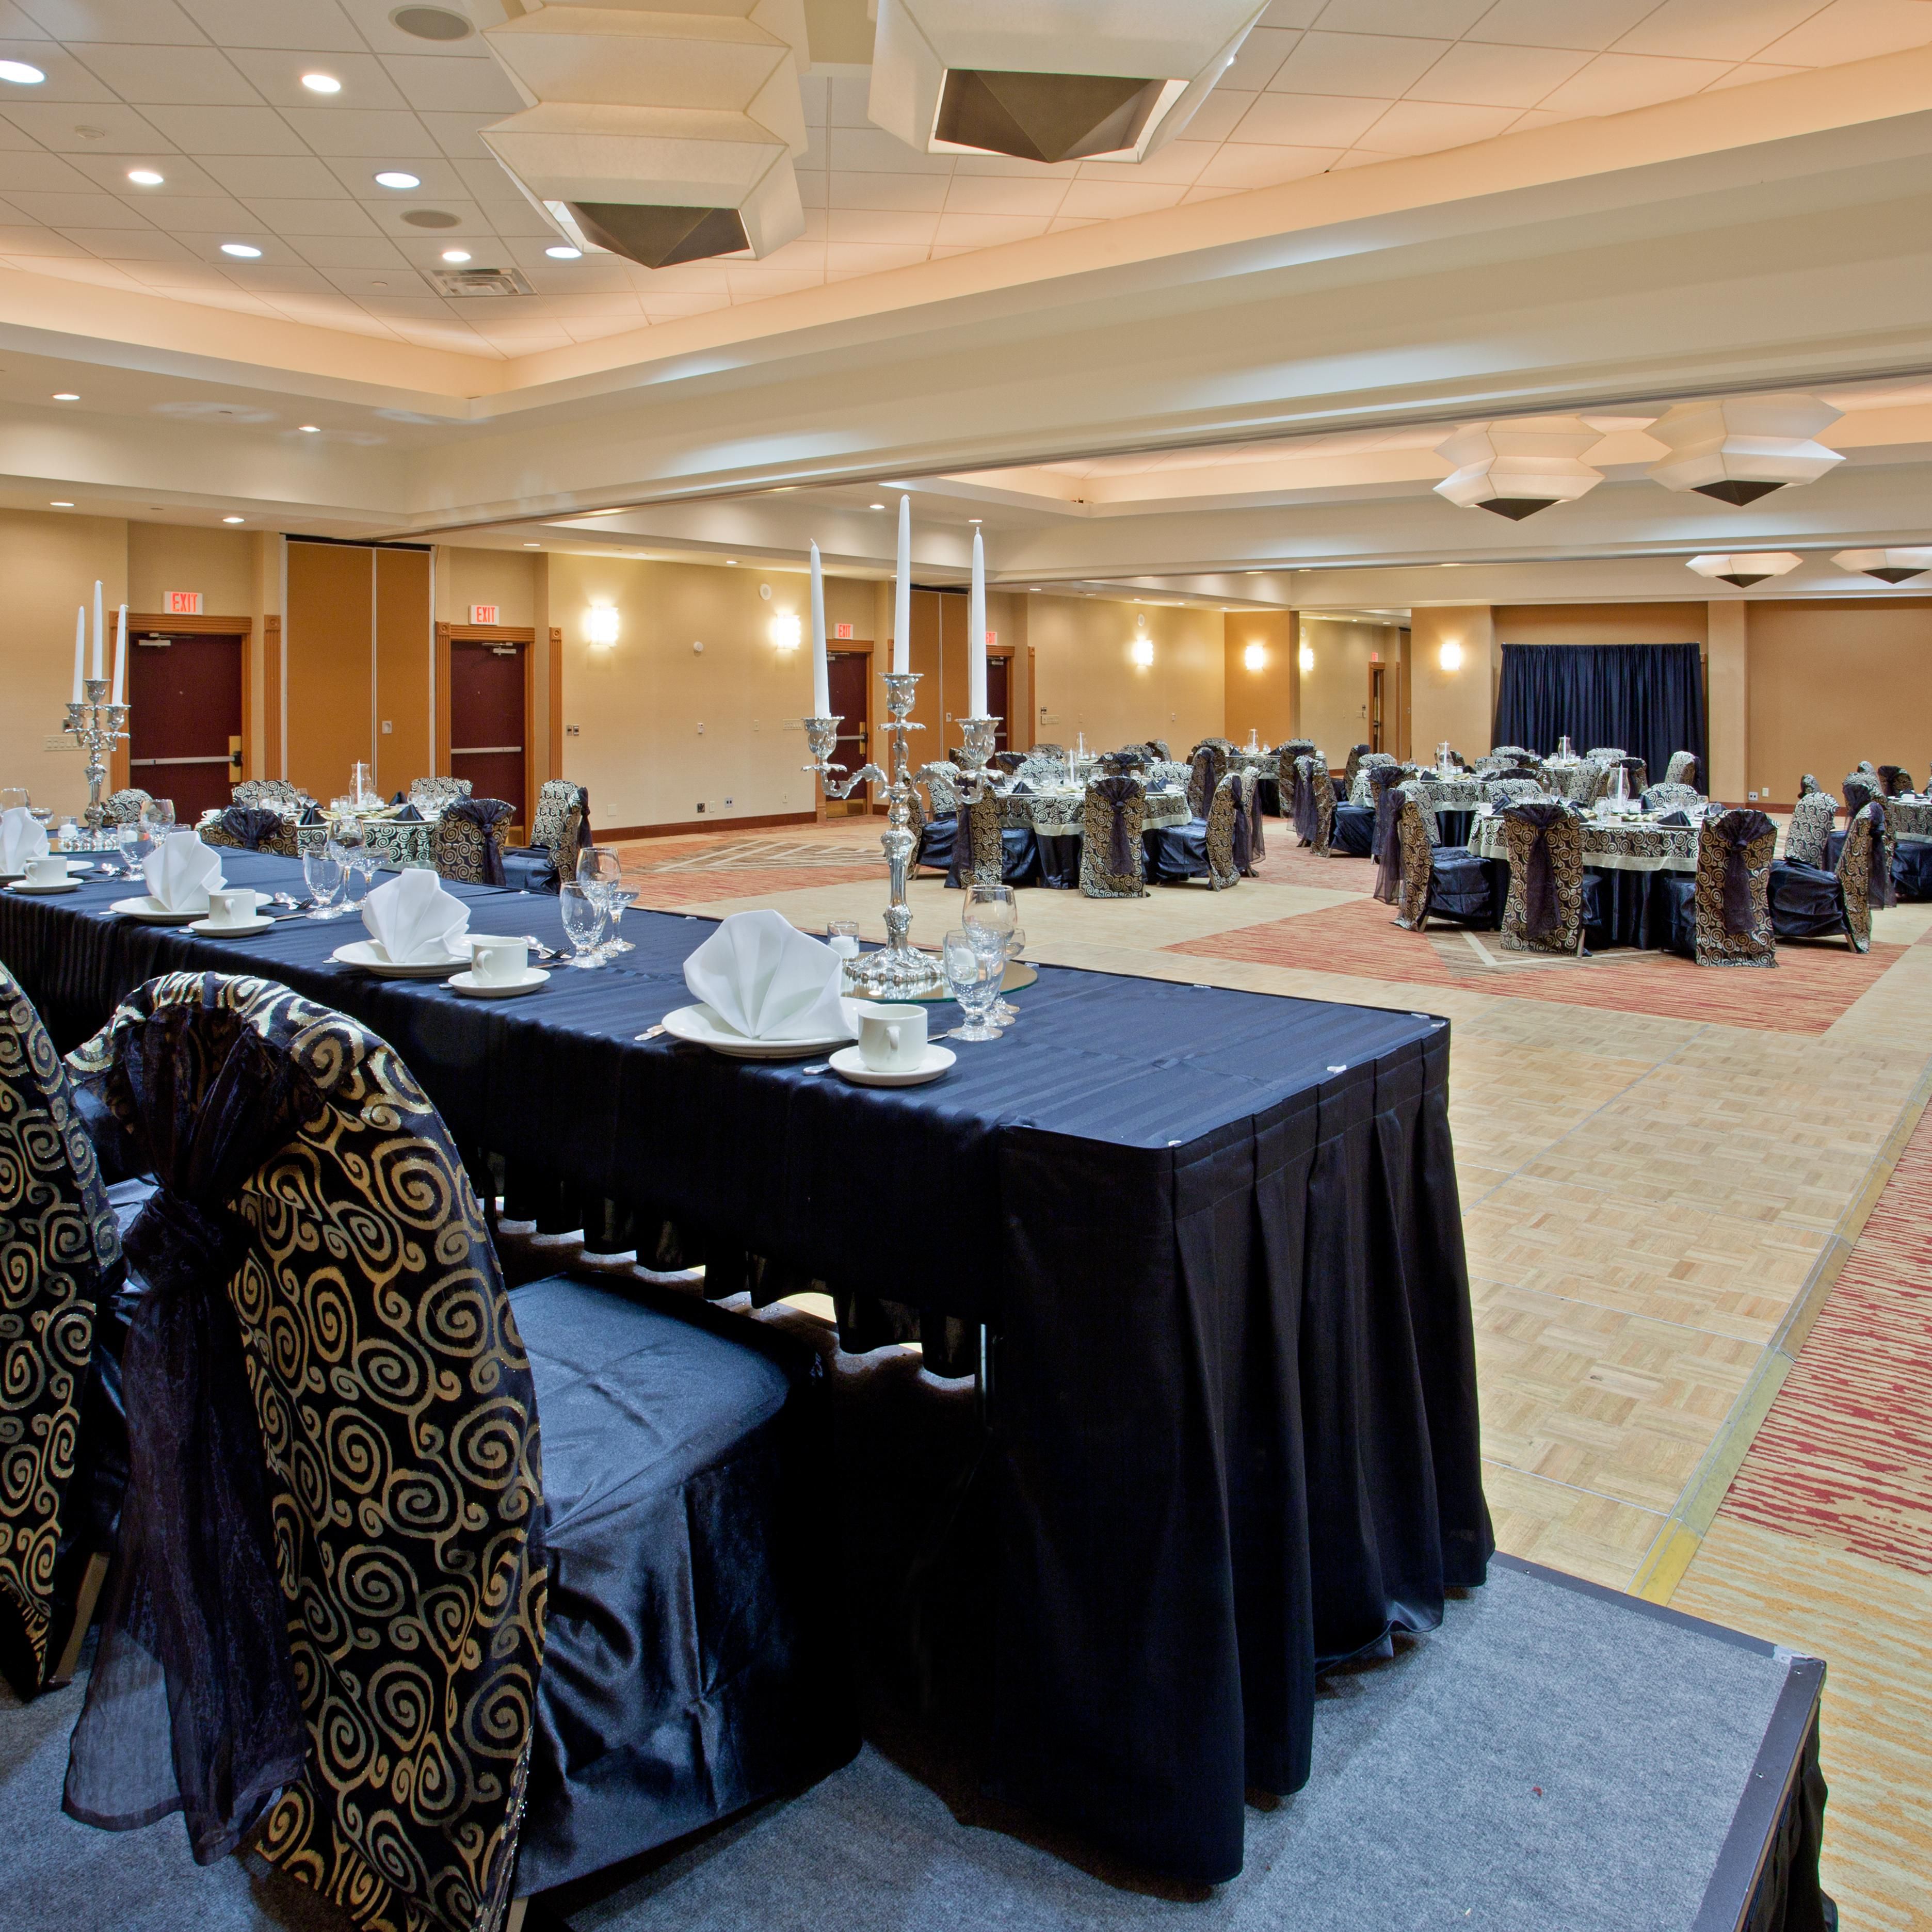 Wow your guests with a stunning event in our ballroom.